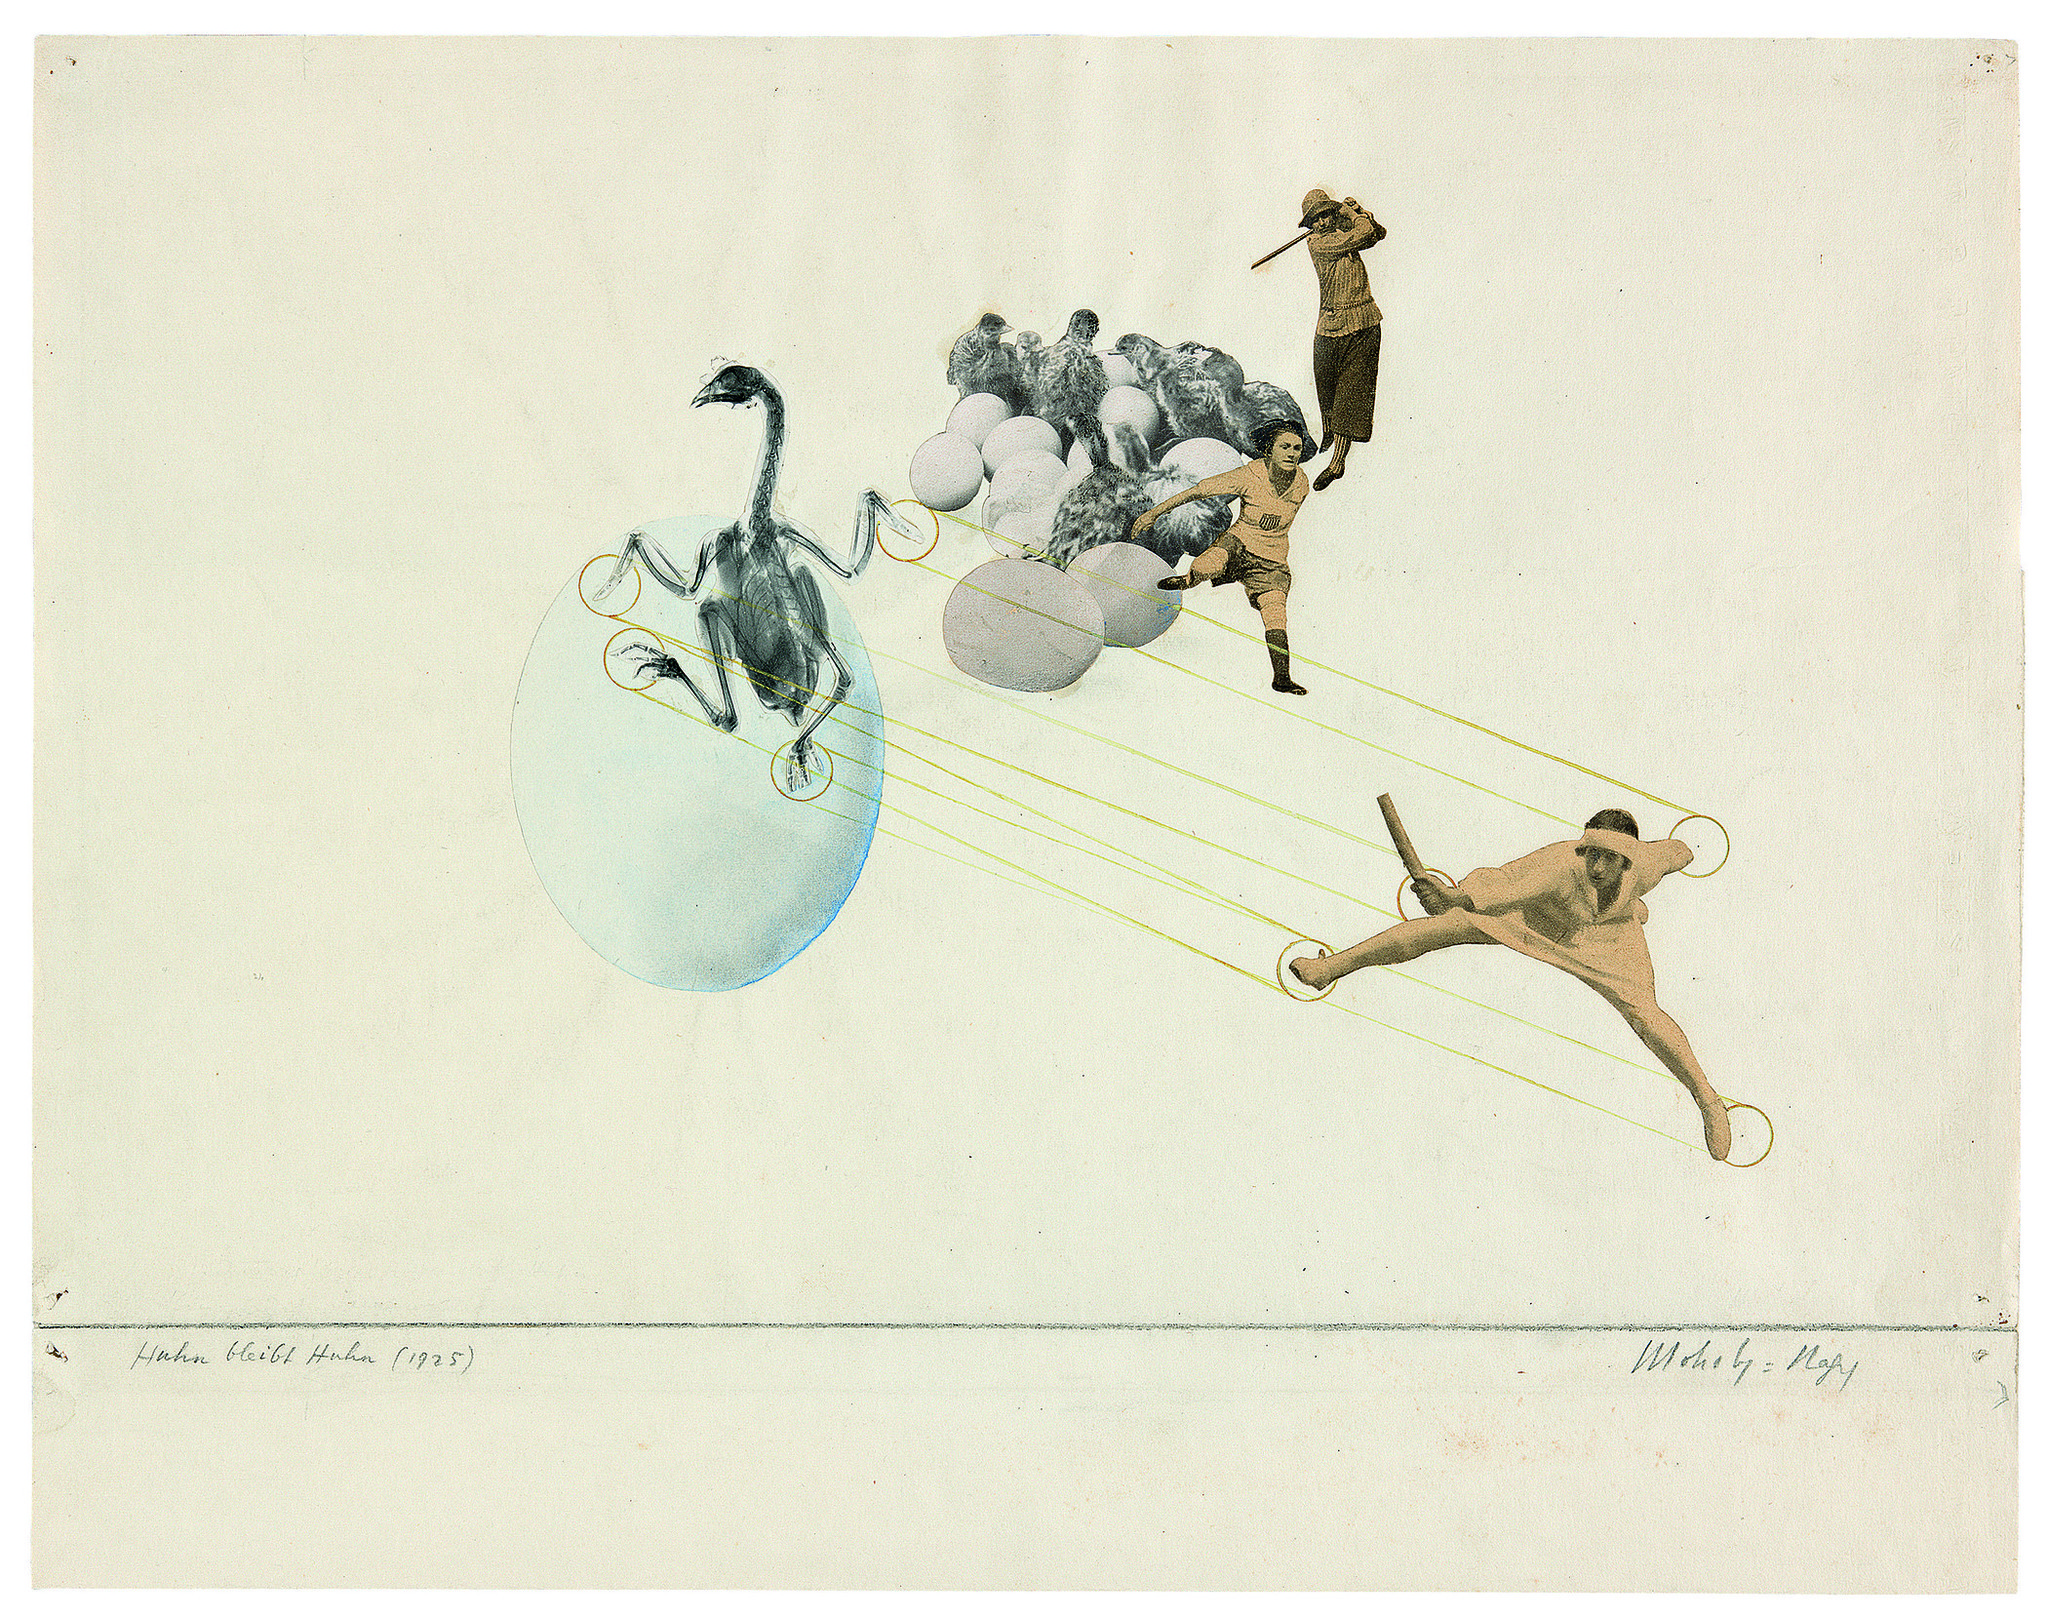 Laszlo Moholy-Nagy, "Once a Chicken, Always a Chicken," 1925, photo montage